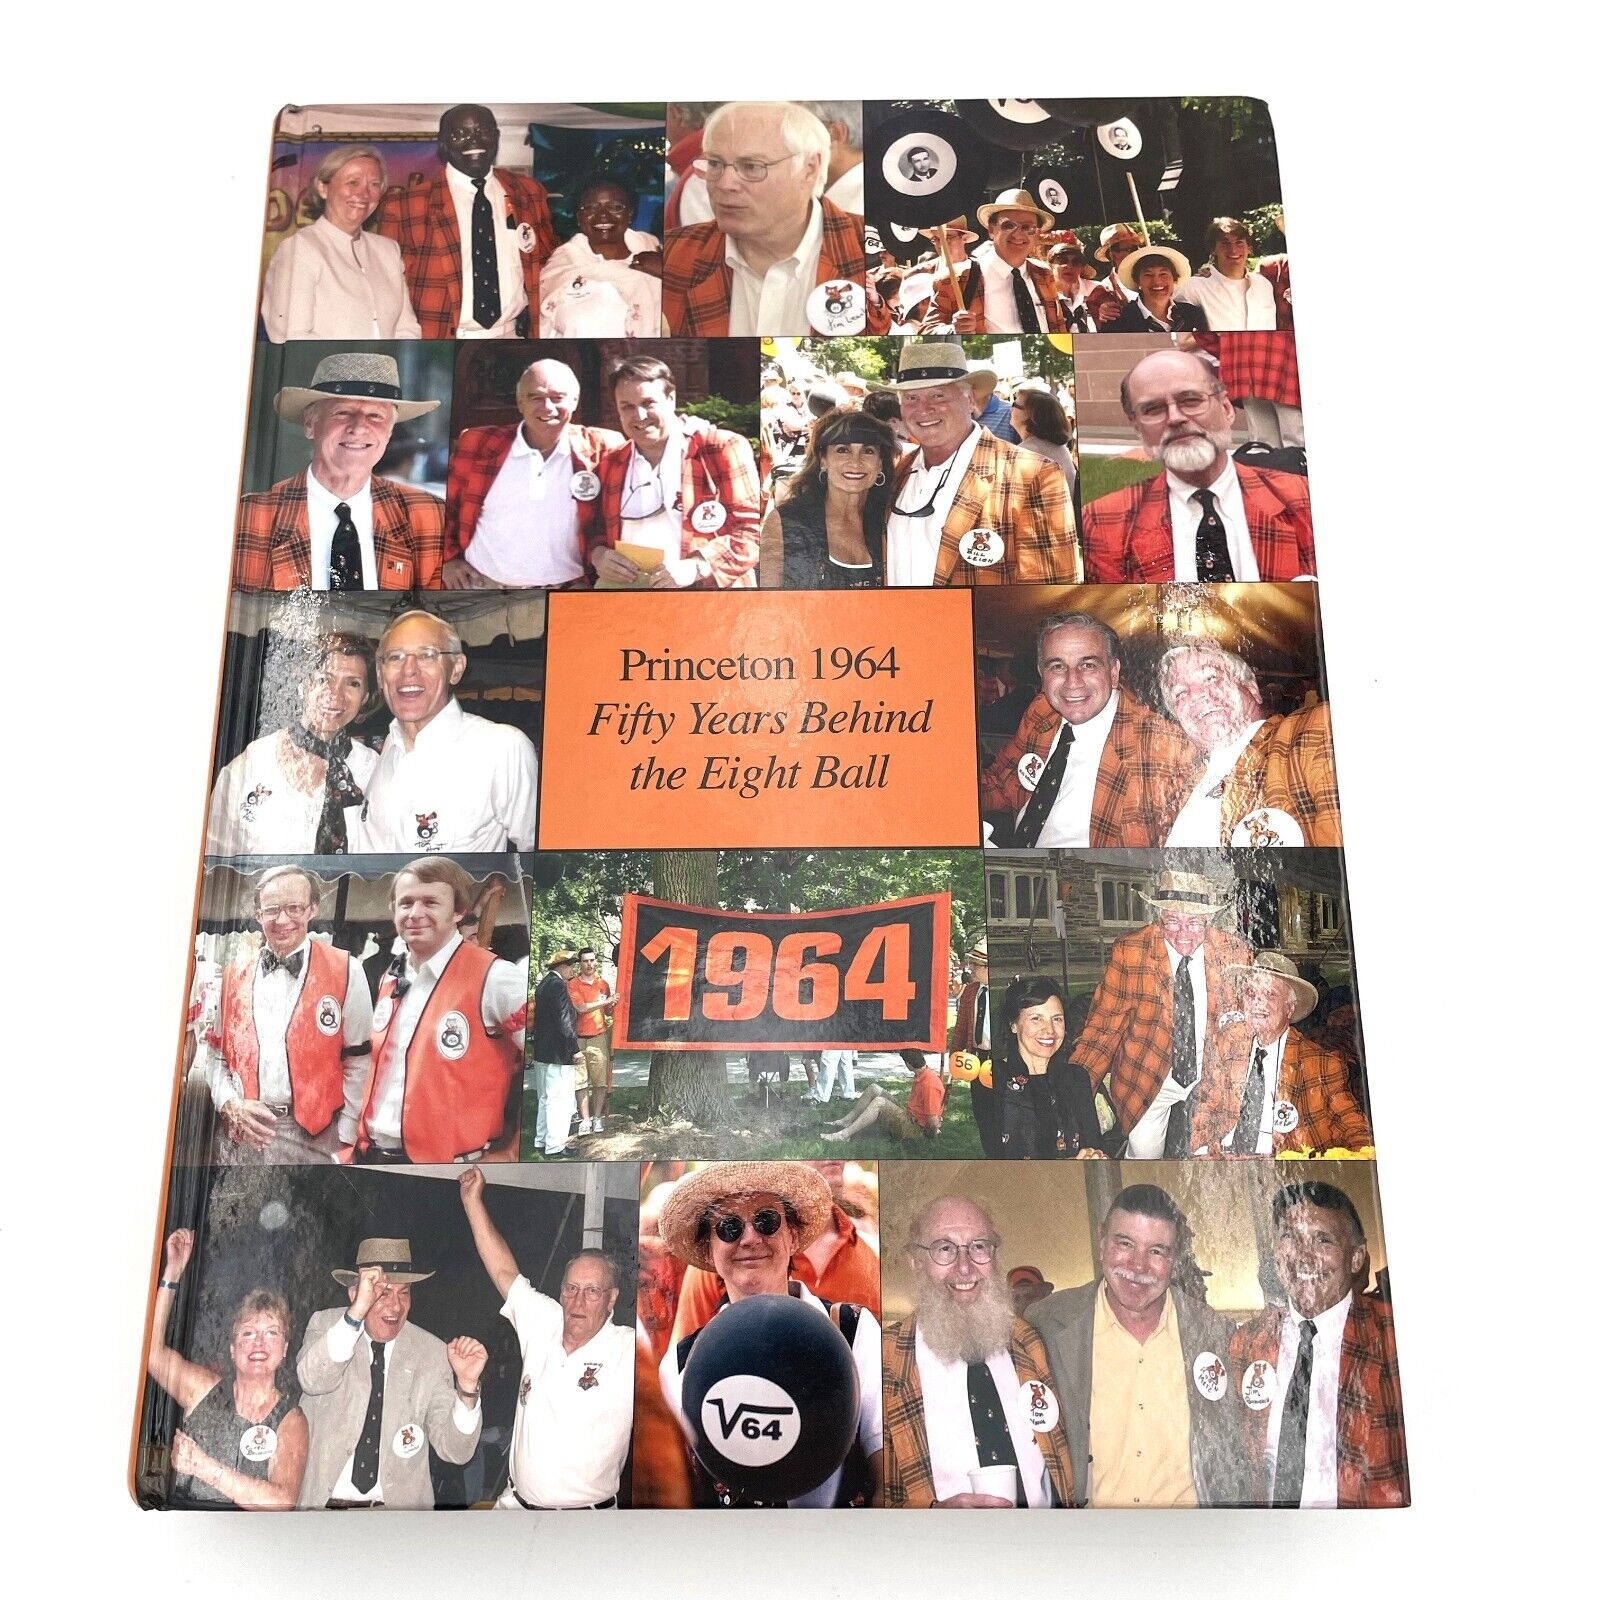 Princeton 1964: Fifty Years Behind the Eight Ball - 50th Reunion Yearbook